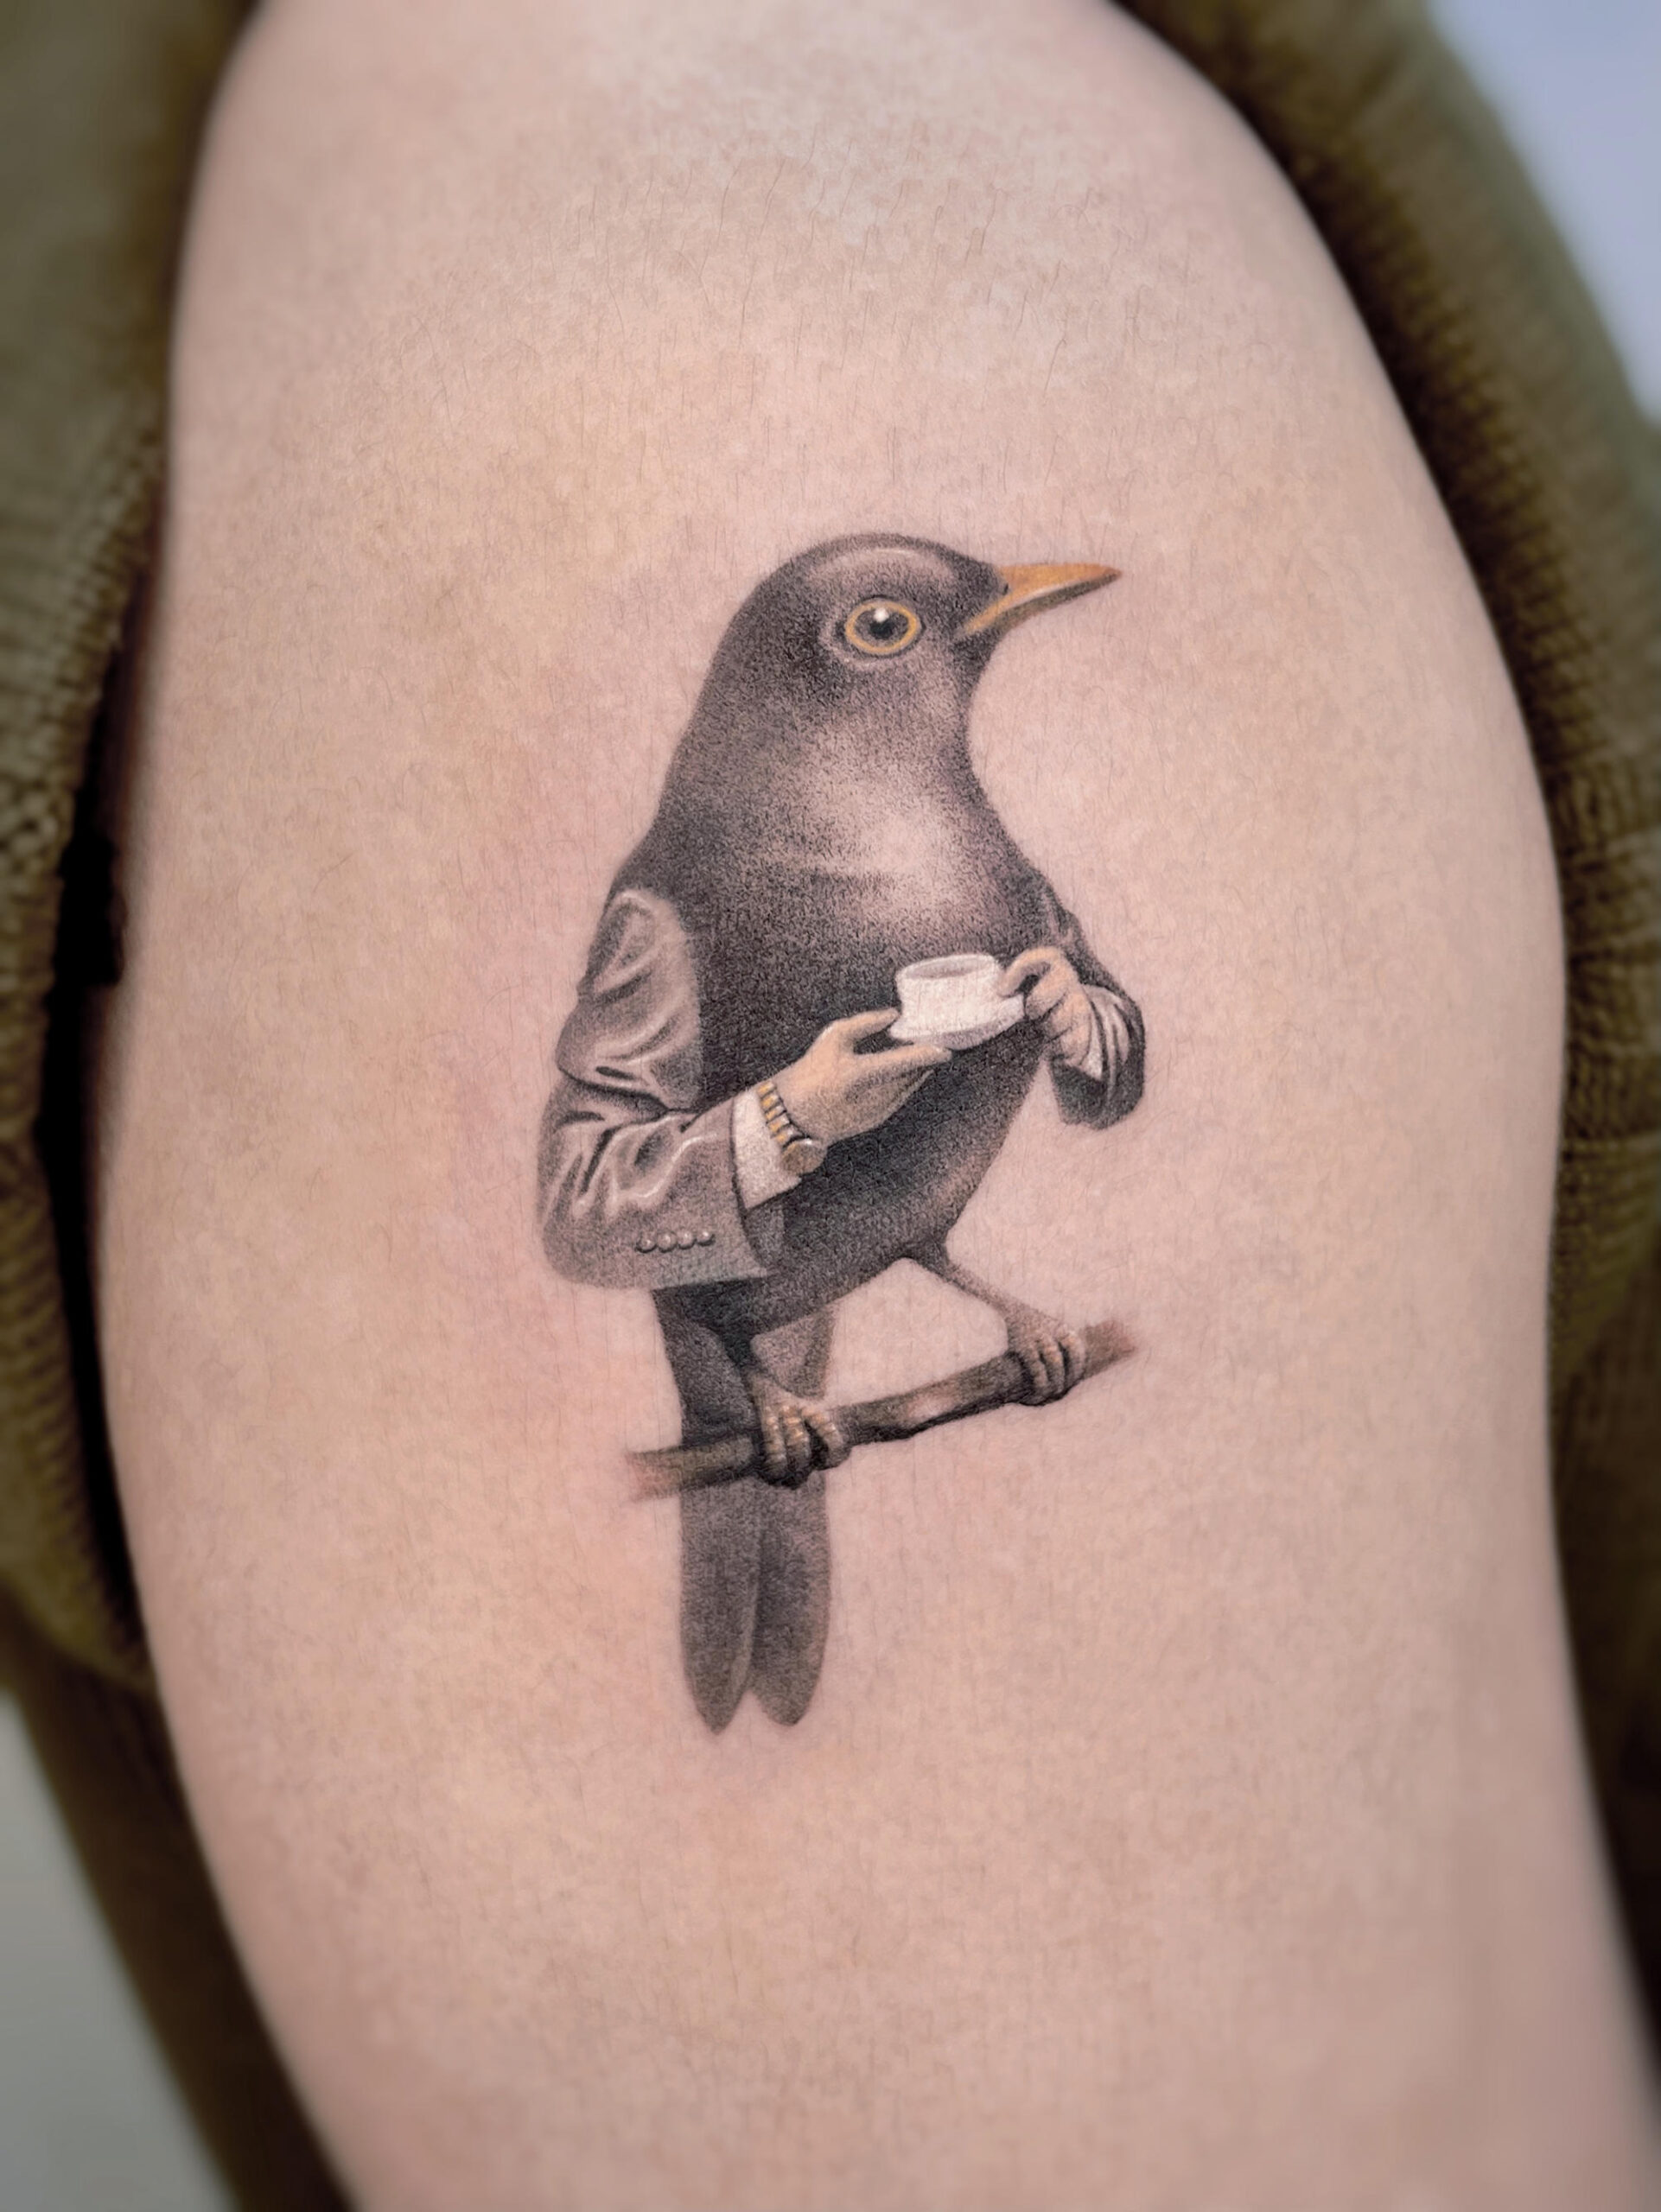 A tattoo by Gyan of a Victorian bird character sipping tea